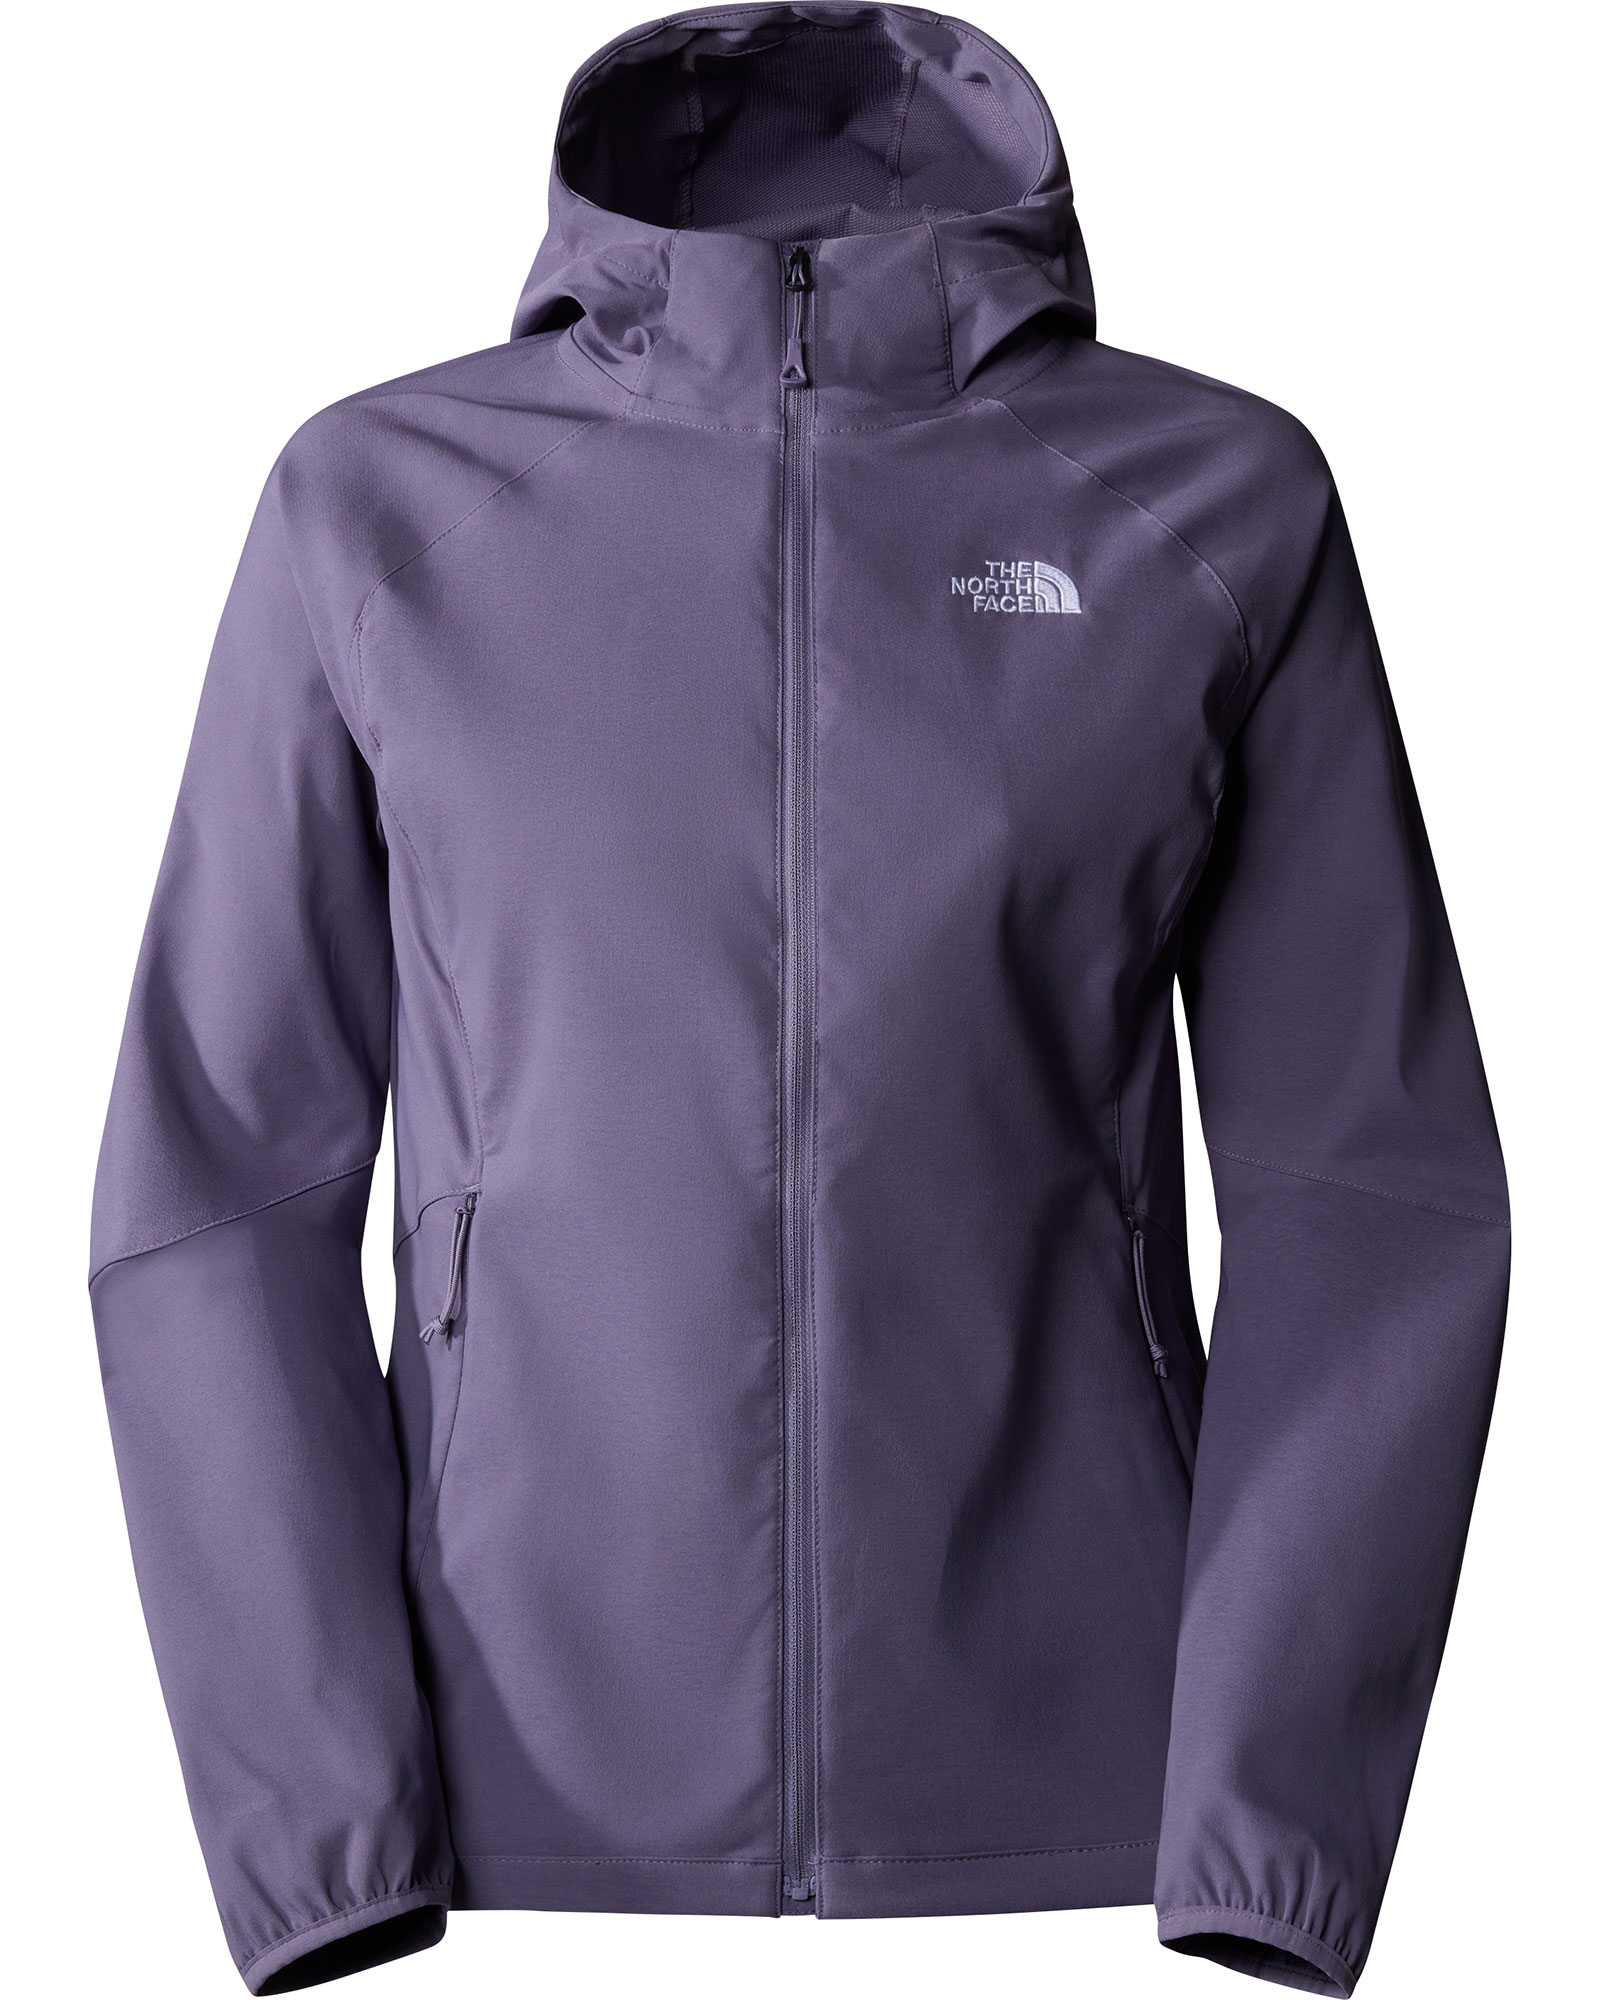 The North Face Women's Apex Nimble Hoodie